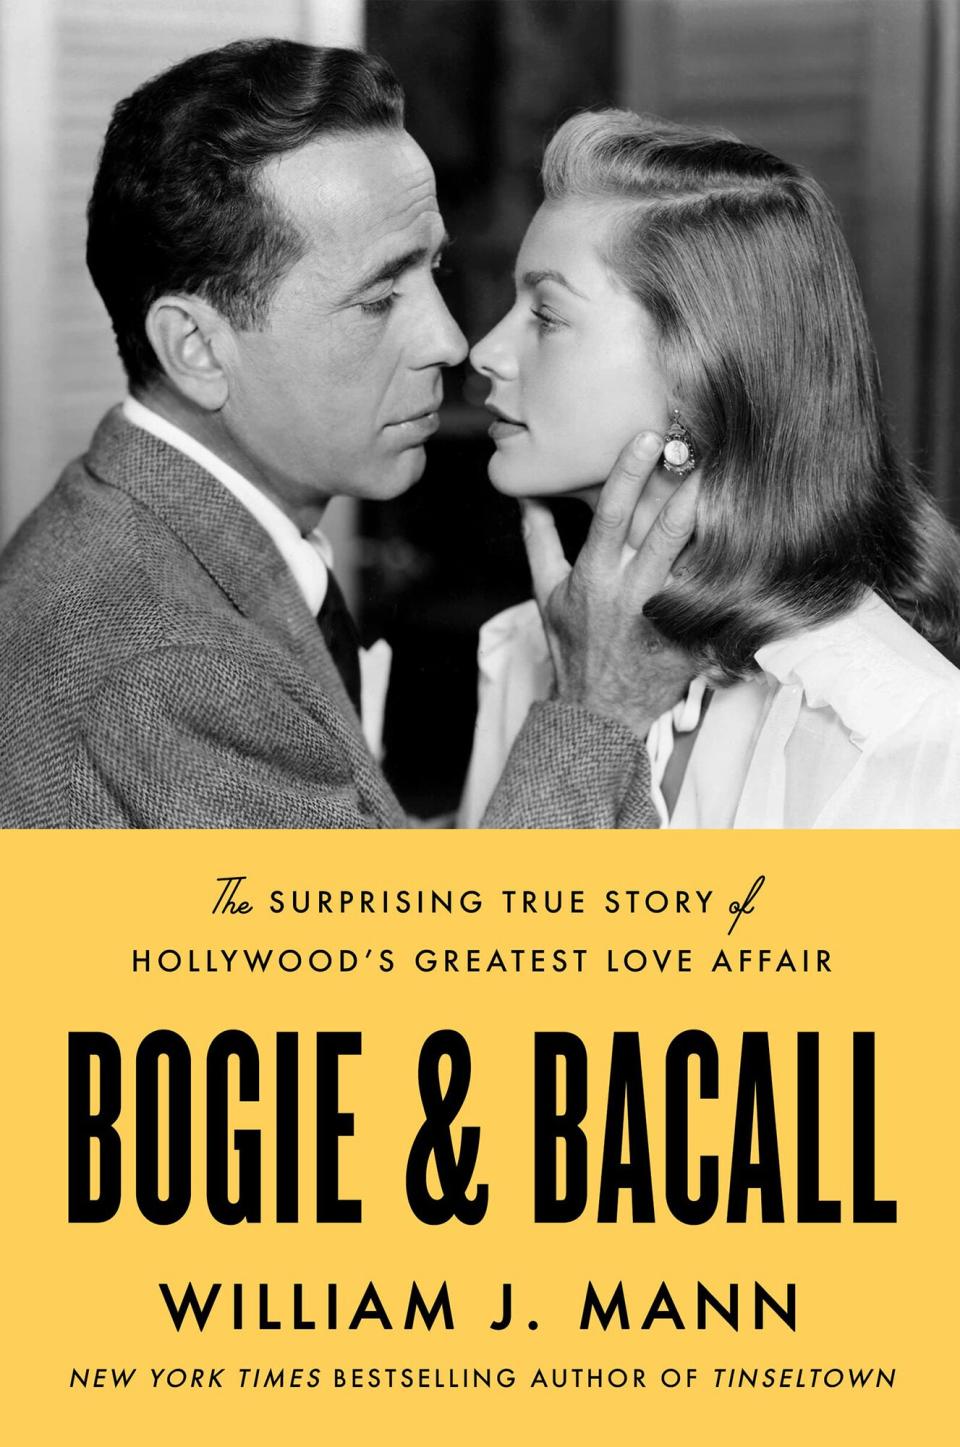 Bogie & Bacall: The Surprising True Story of Hollywood's Greatest Love Affair Hardcover – July 11, 2023 by William J. Mann (